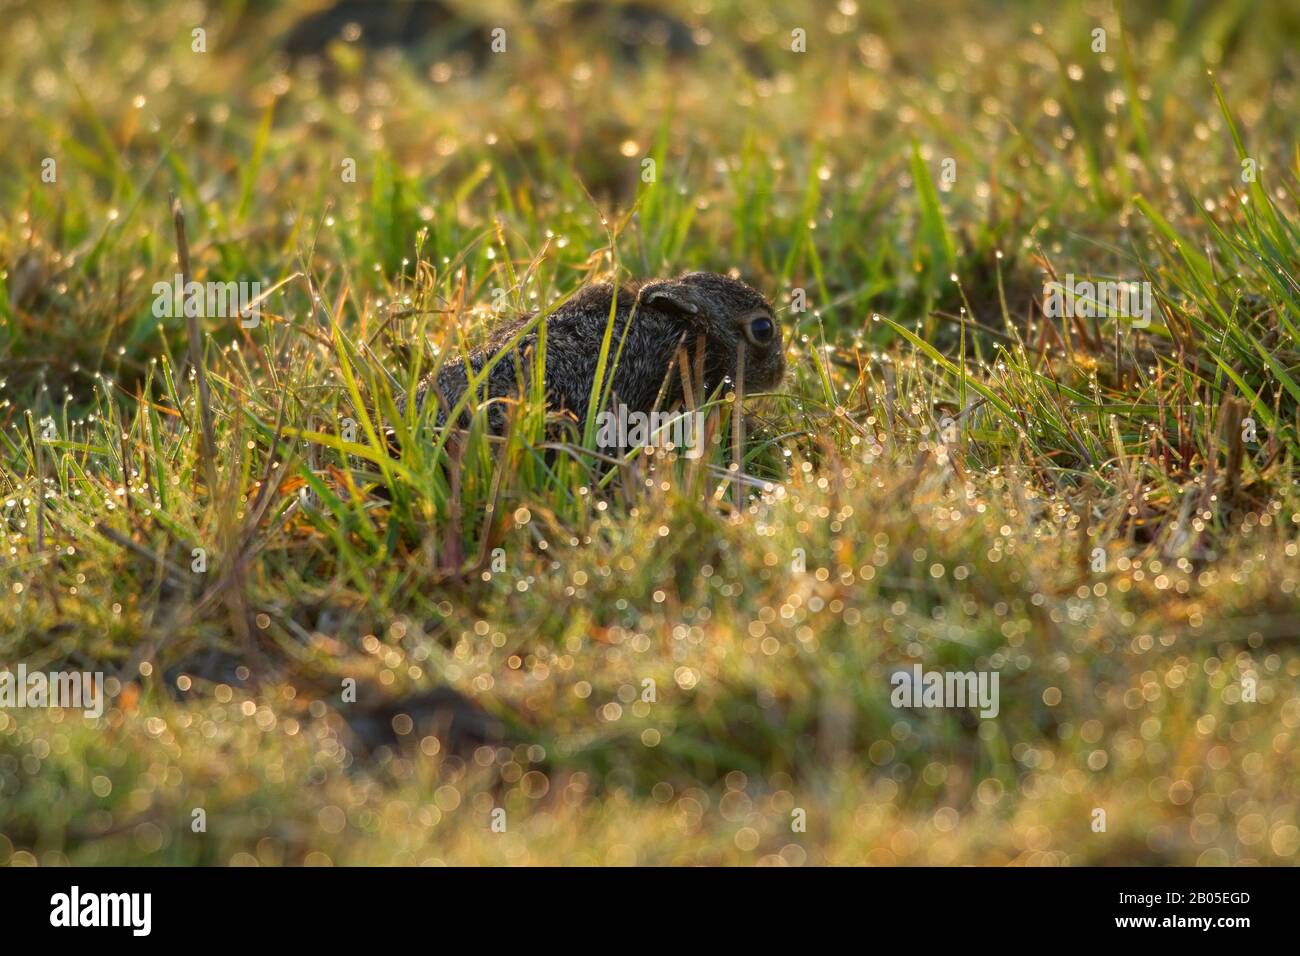 European hare, Brown hare (Lepus europaeus), young animal ducking in a damp meadow, side view, Germany, North Rhine-Westphalia Stock Photo